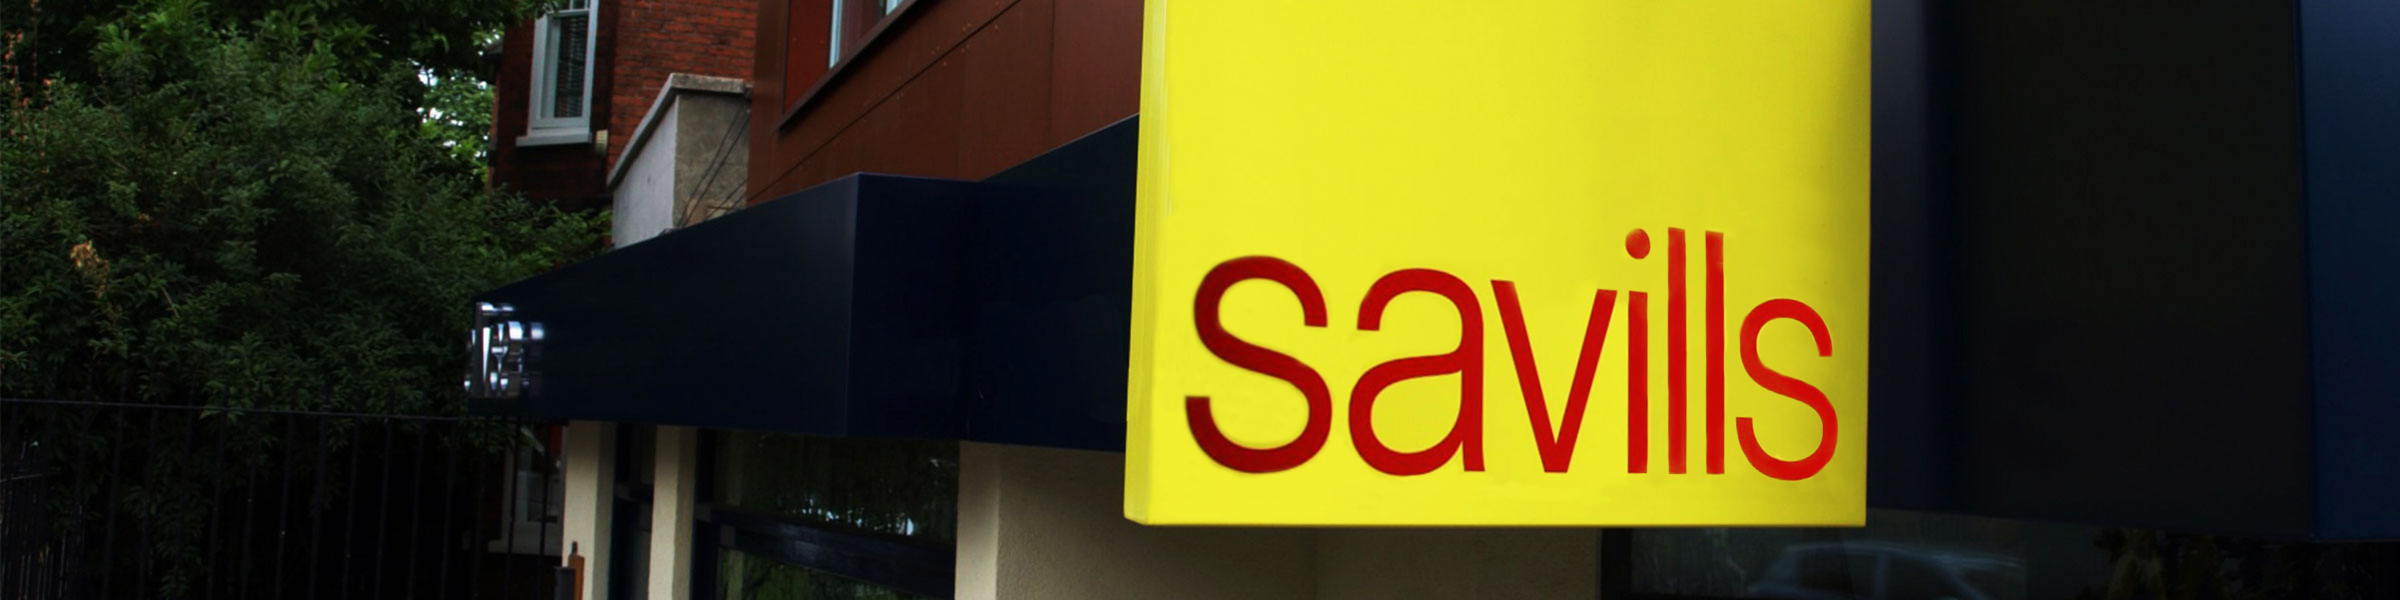 We are now working with Savills in the UK